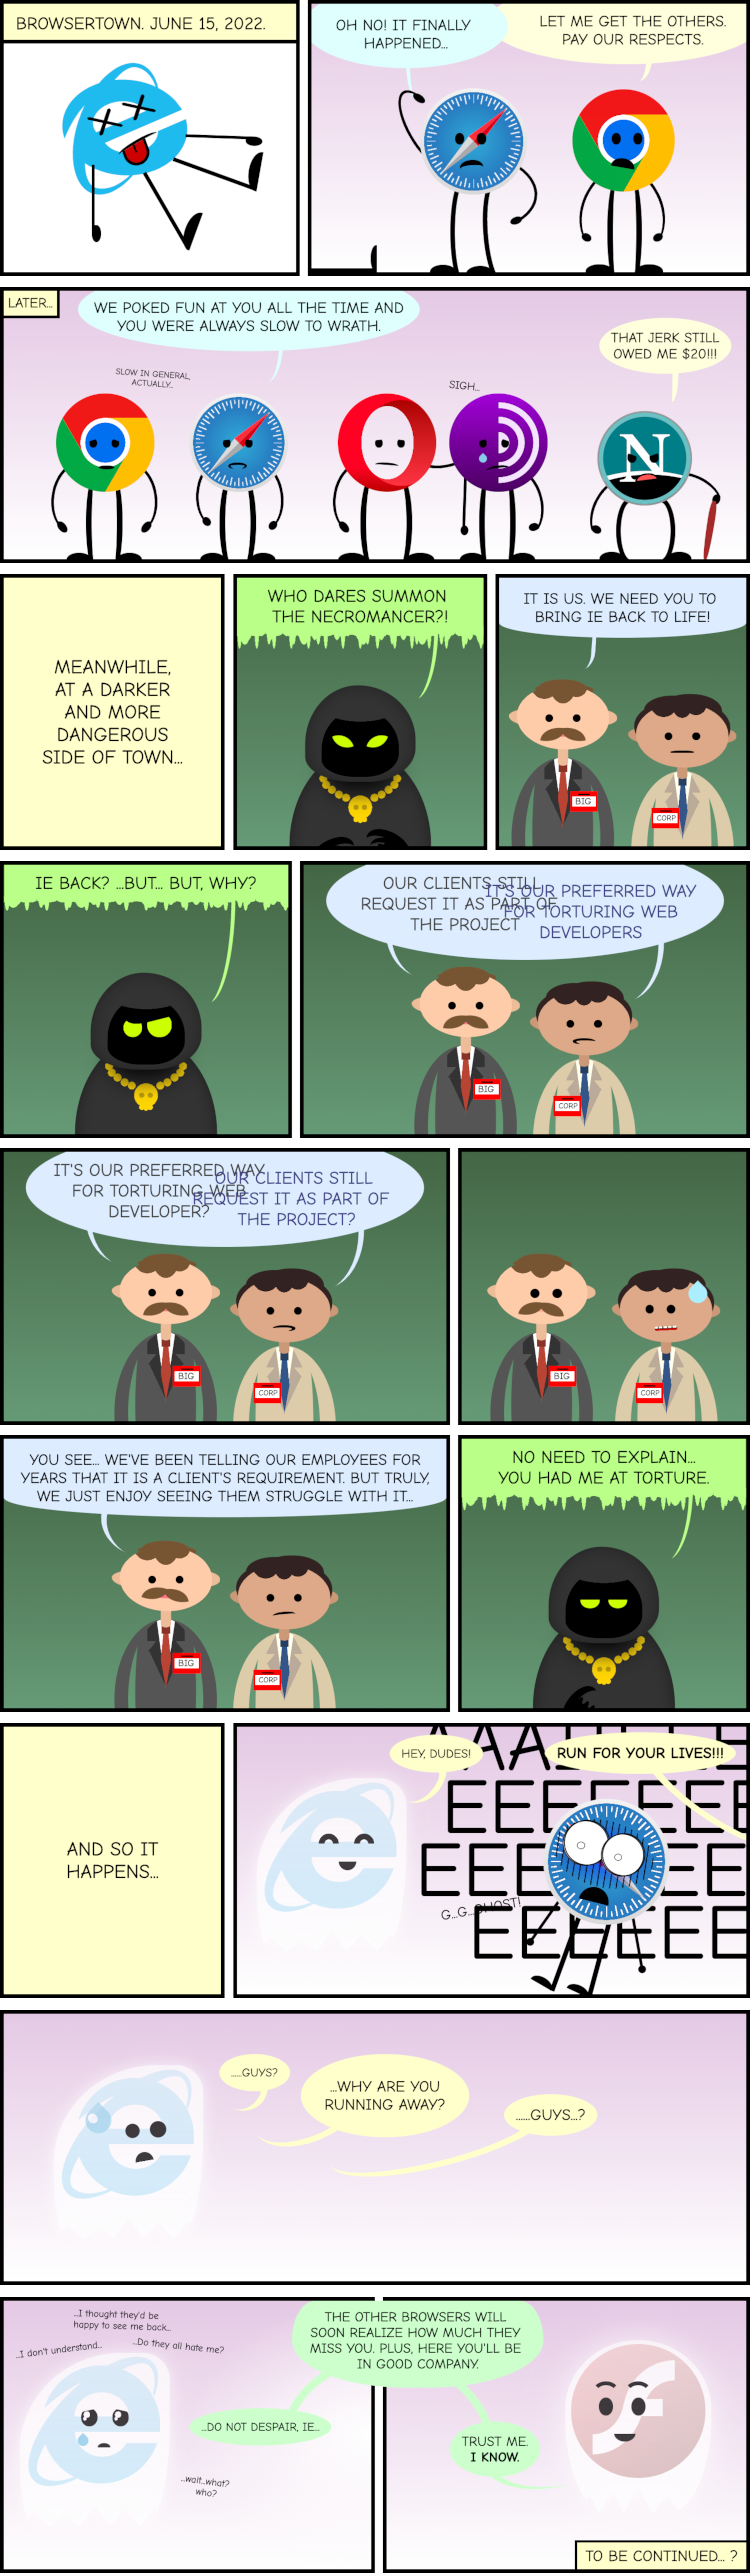 Cartoon page divided in 3 sections with multiple panels each. In the first section, IE is dead and the rest of the browsers get together to honor it. In the second section, two suited men (Big and Corp) visit the necromancer asking to bring IE back to life because it's their favorite way of torturing employees. In the last section, IE is back as a ghost, the other browsers run scared to IE despair, and the ghost of the Flash logo tries to cheer IE up... to be continued?